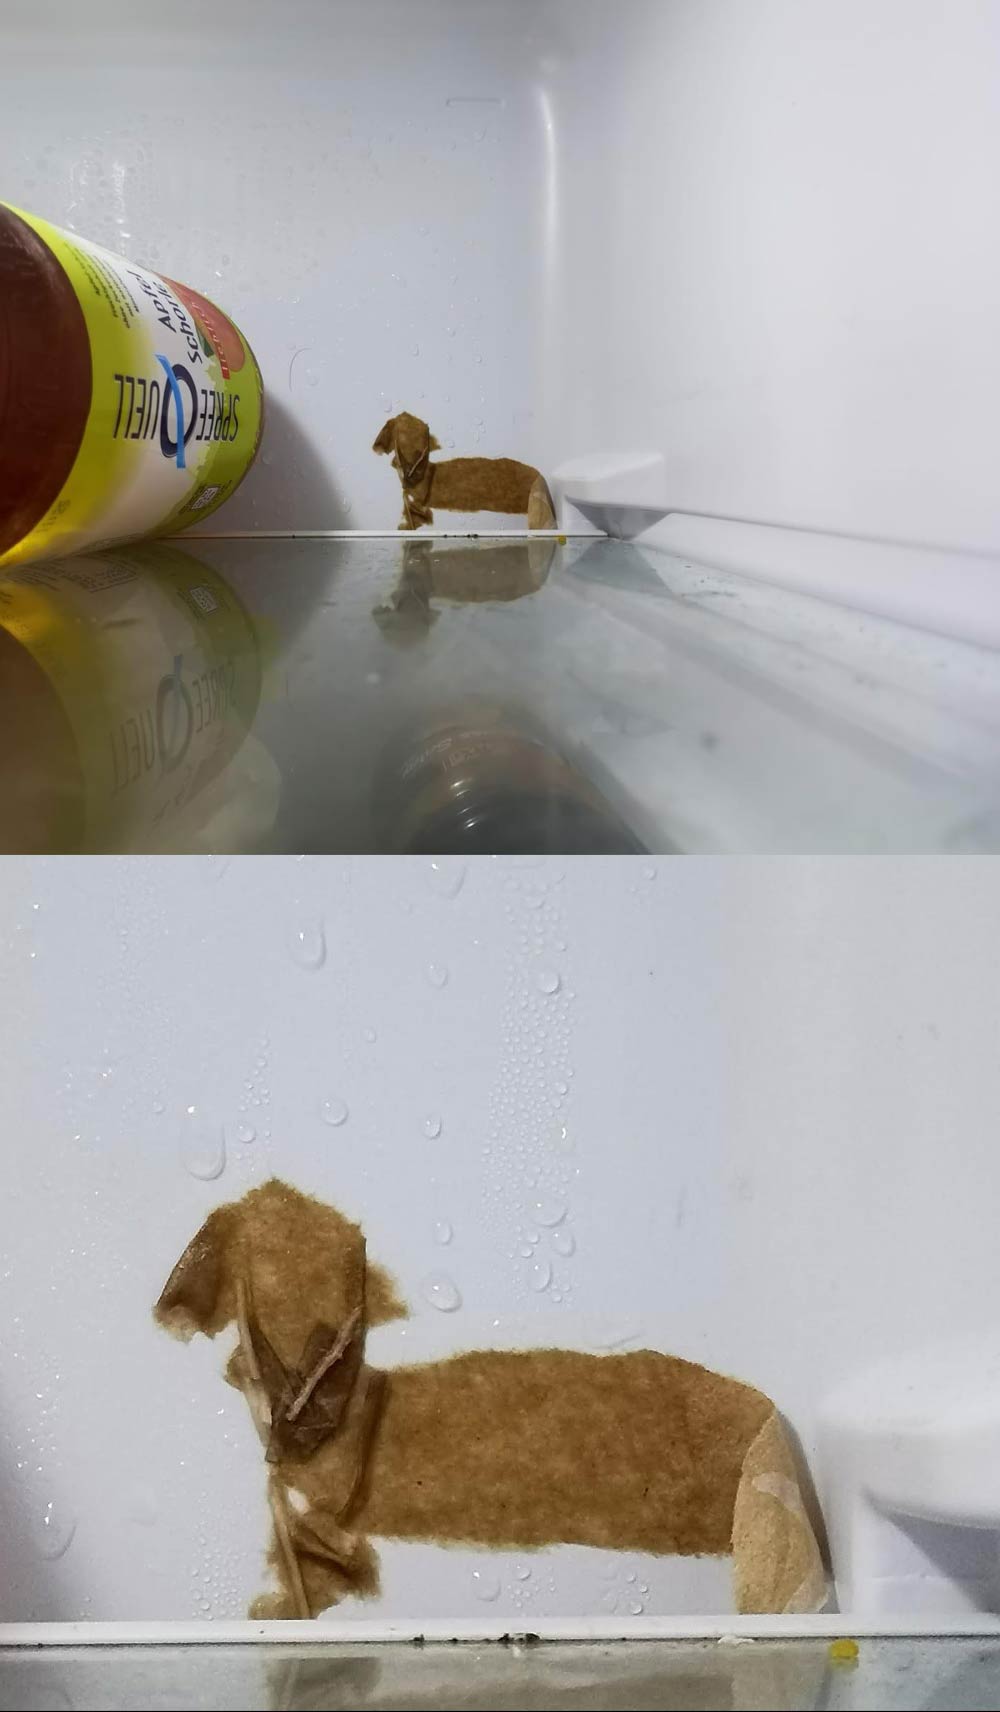 The piece of paper that is frozen to the back of my fridge looks like a wiener dog